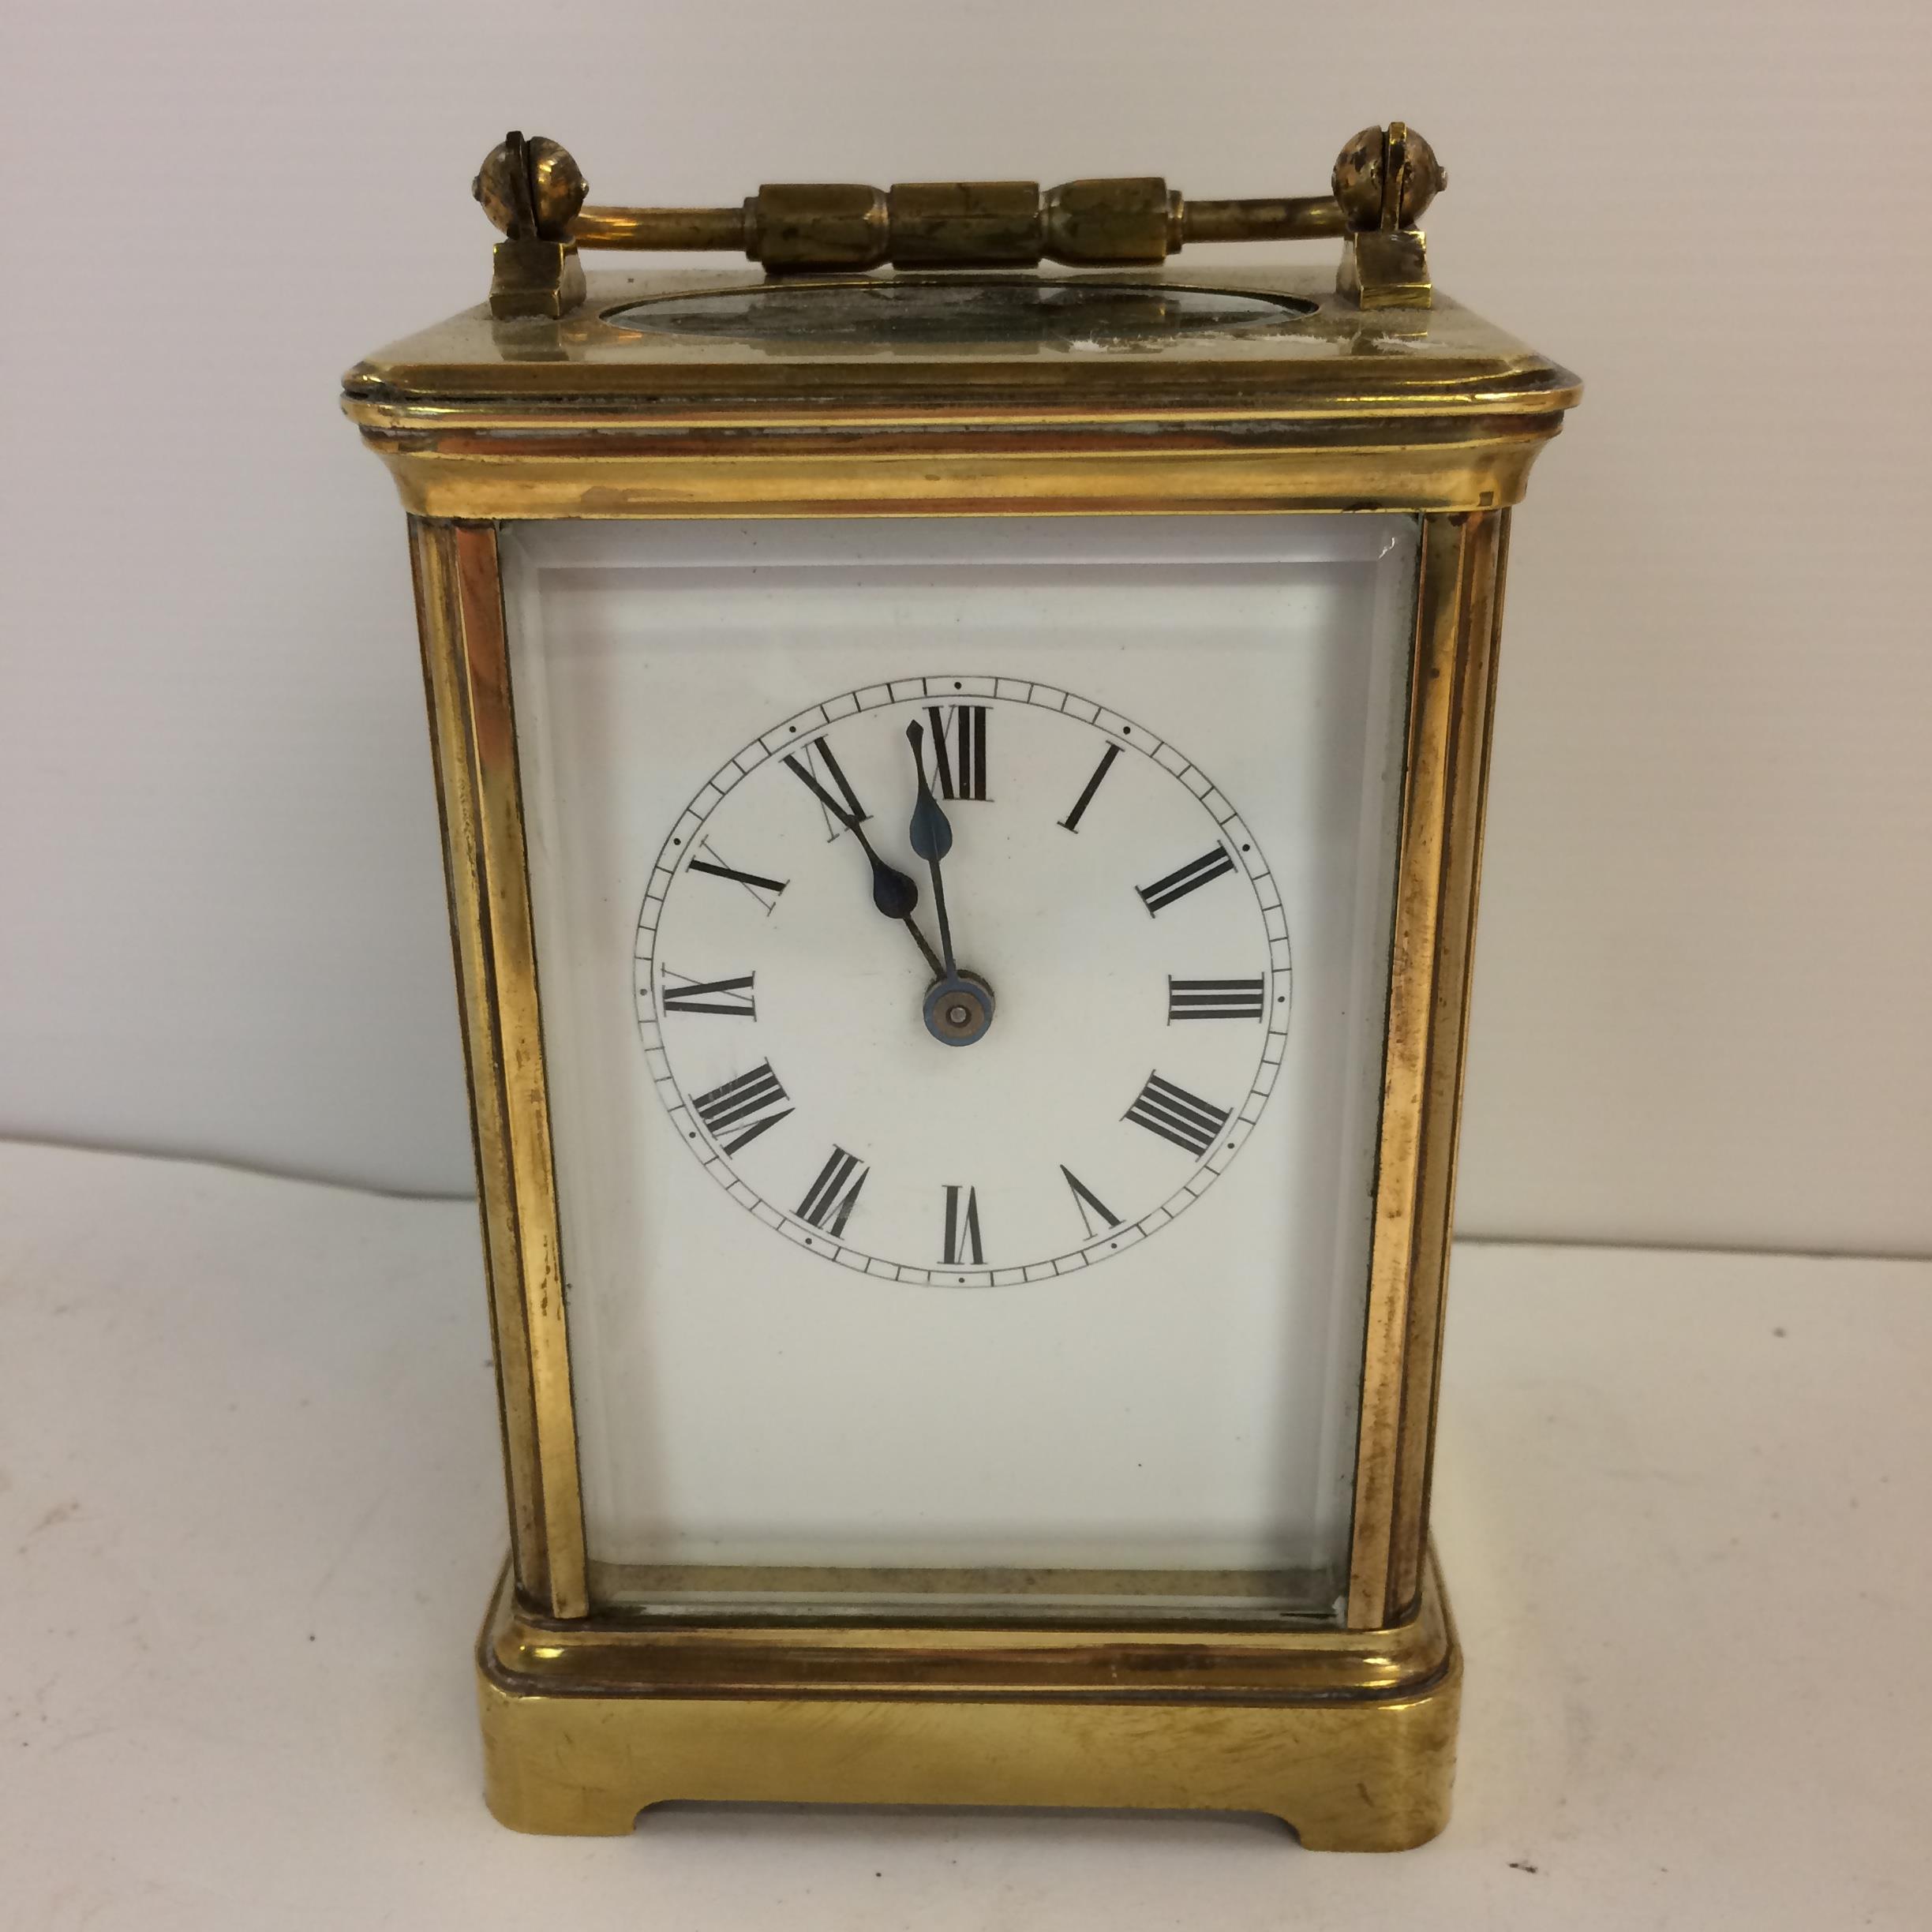 French gilt brass carriage clock with 4 bevelled glass panes with key